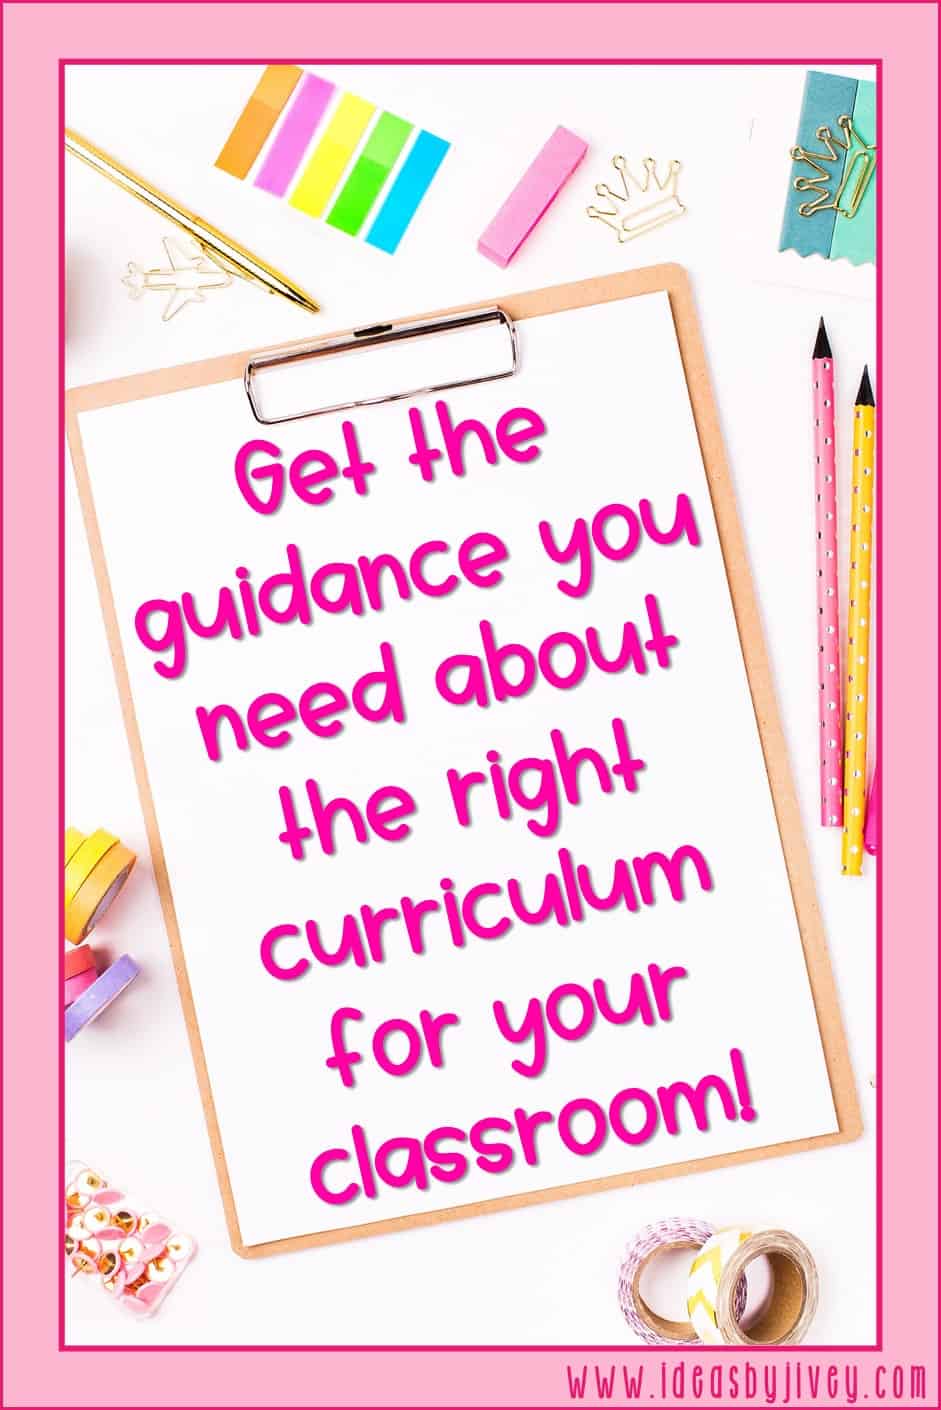 Thousands of teachers are already transforming their traditional teaching into fresh, integrated practices and seeing amazing results, and you can, too! Get guidance on the right curriculum for your classroom from Ideas by Jivey! Best practices and FAQs help you make the best choice for your students' needs!